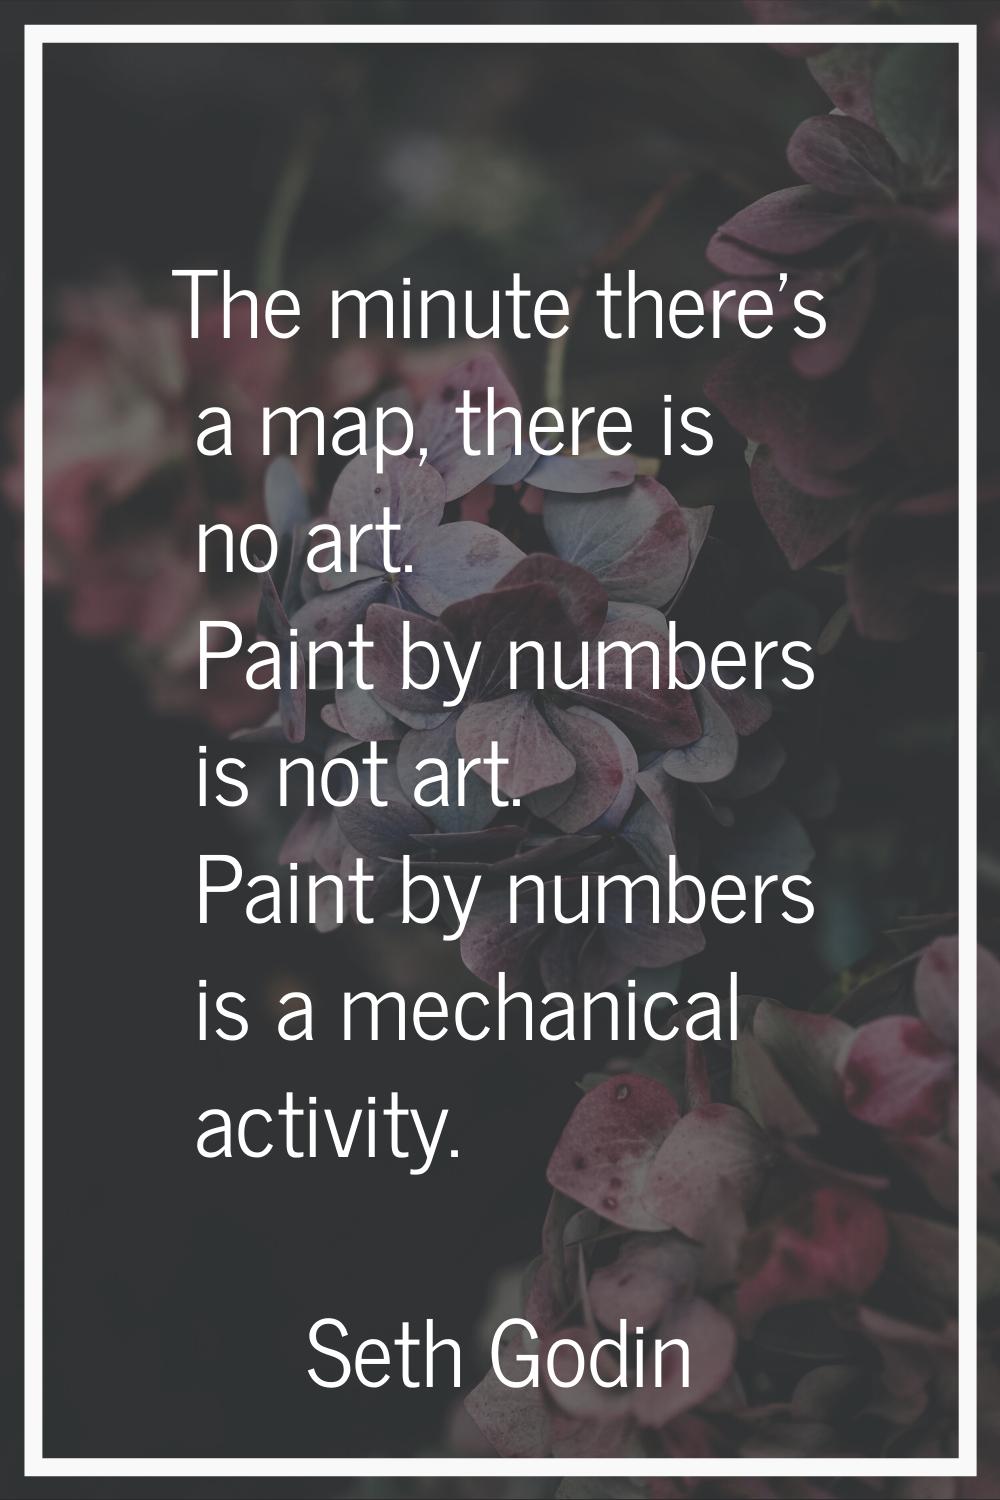 The minute there's a map, there is no art. Paint by numbers is not art. Paint by numbers is a mecha